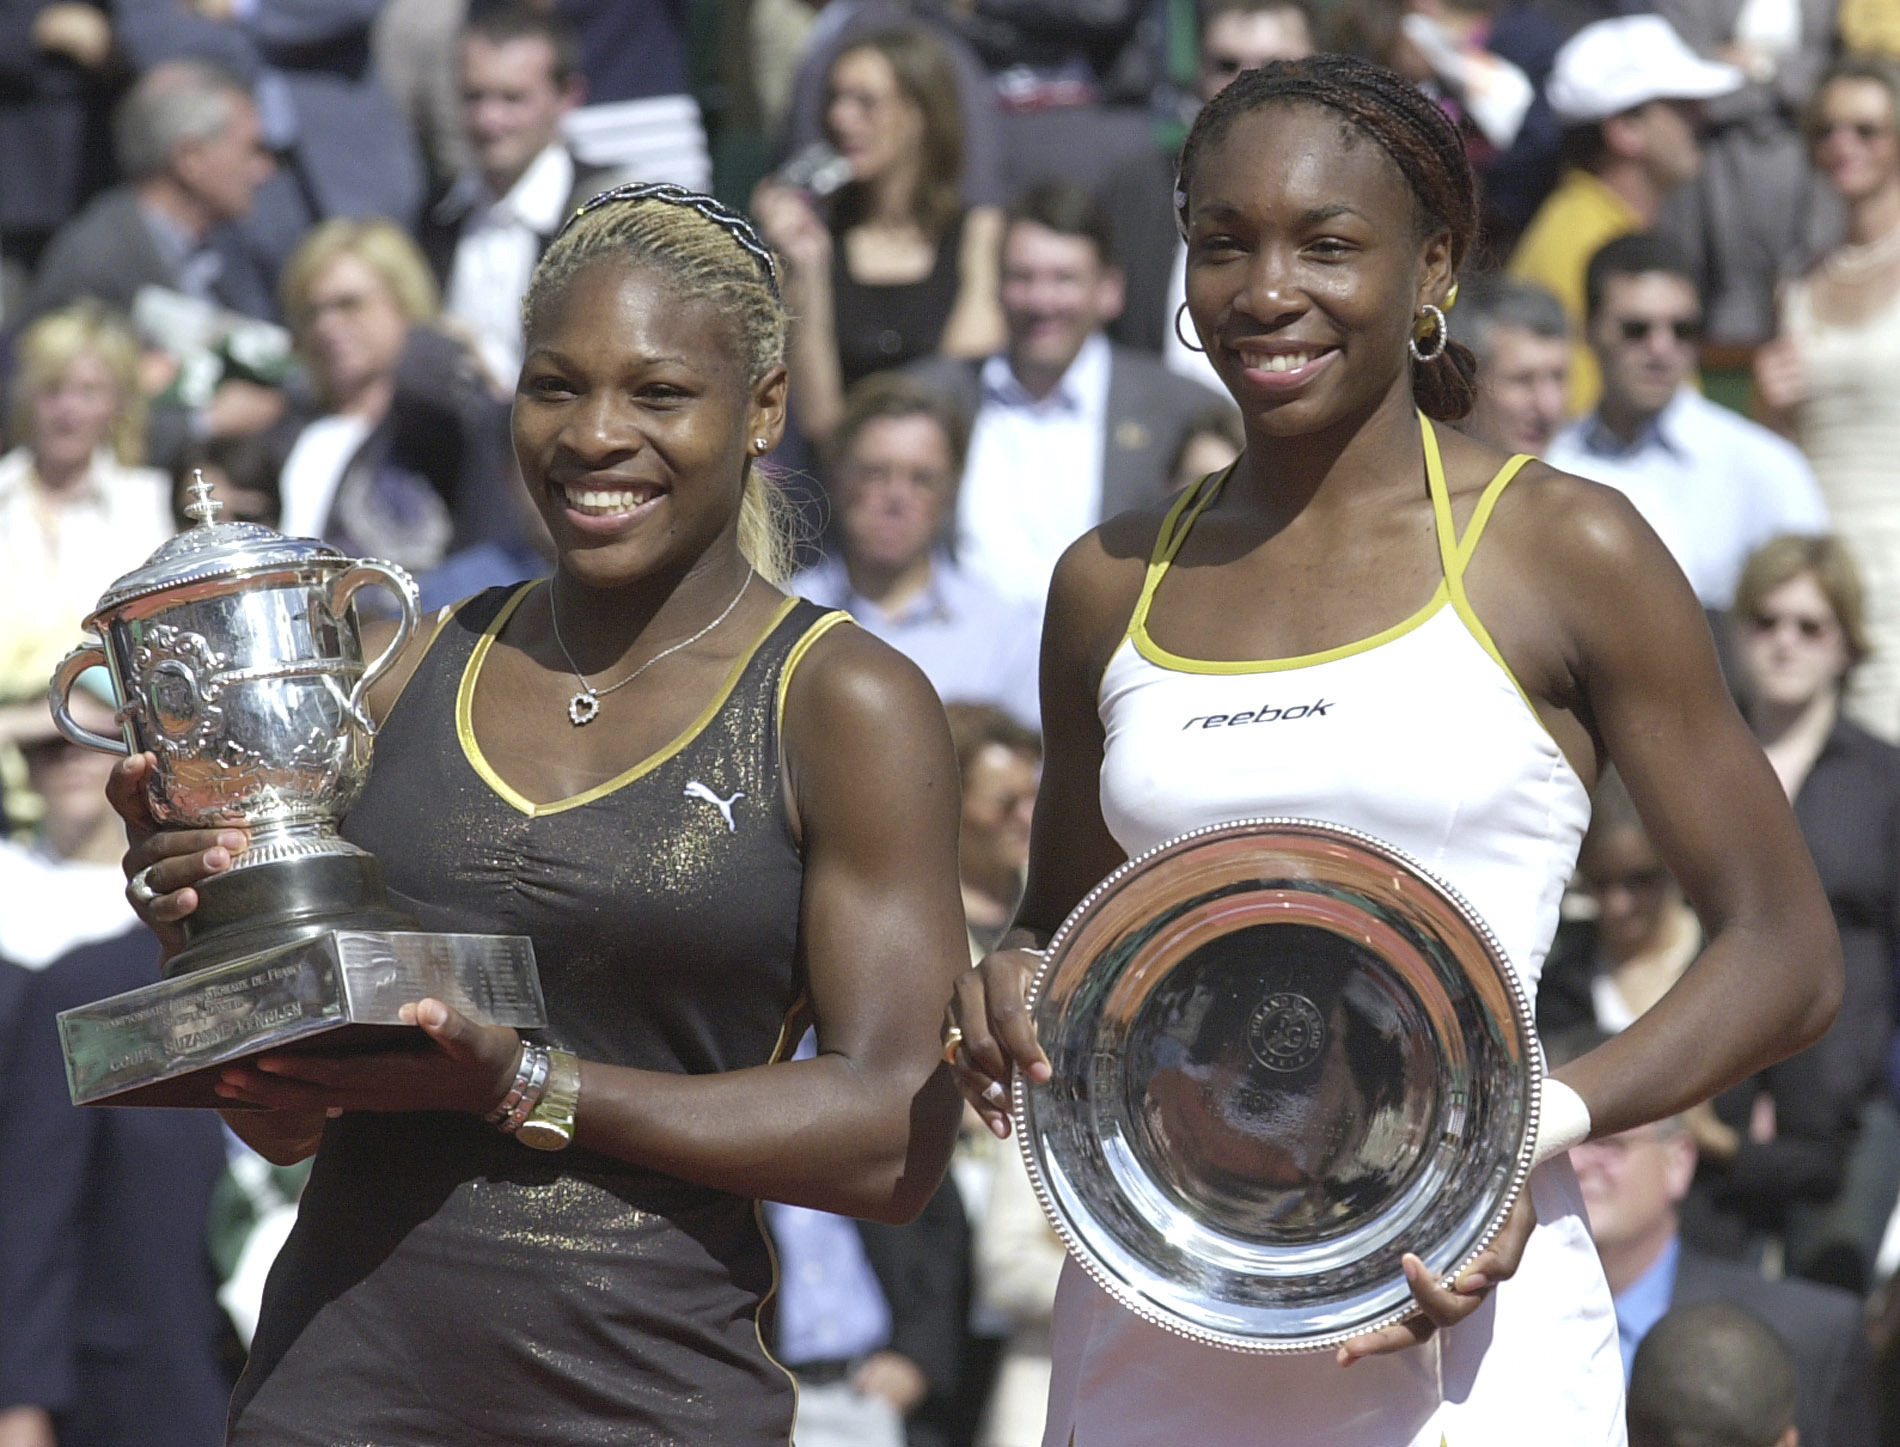 Serena and Venus' sister calls dad a 'sperm donor' who abandoned first  family